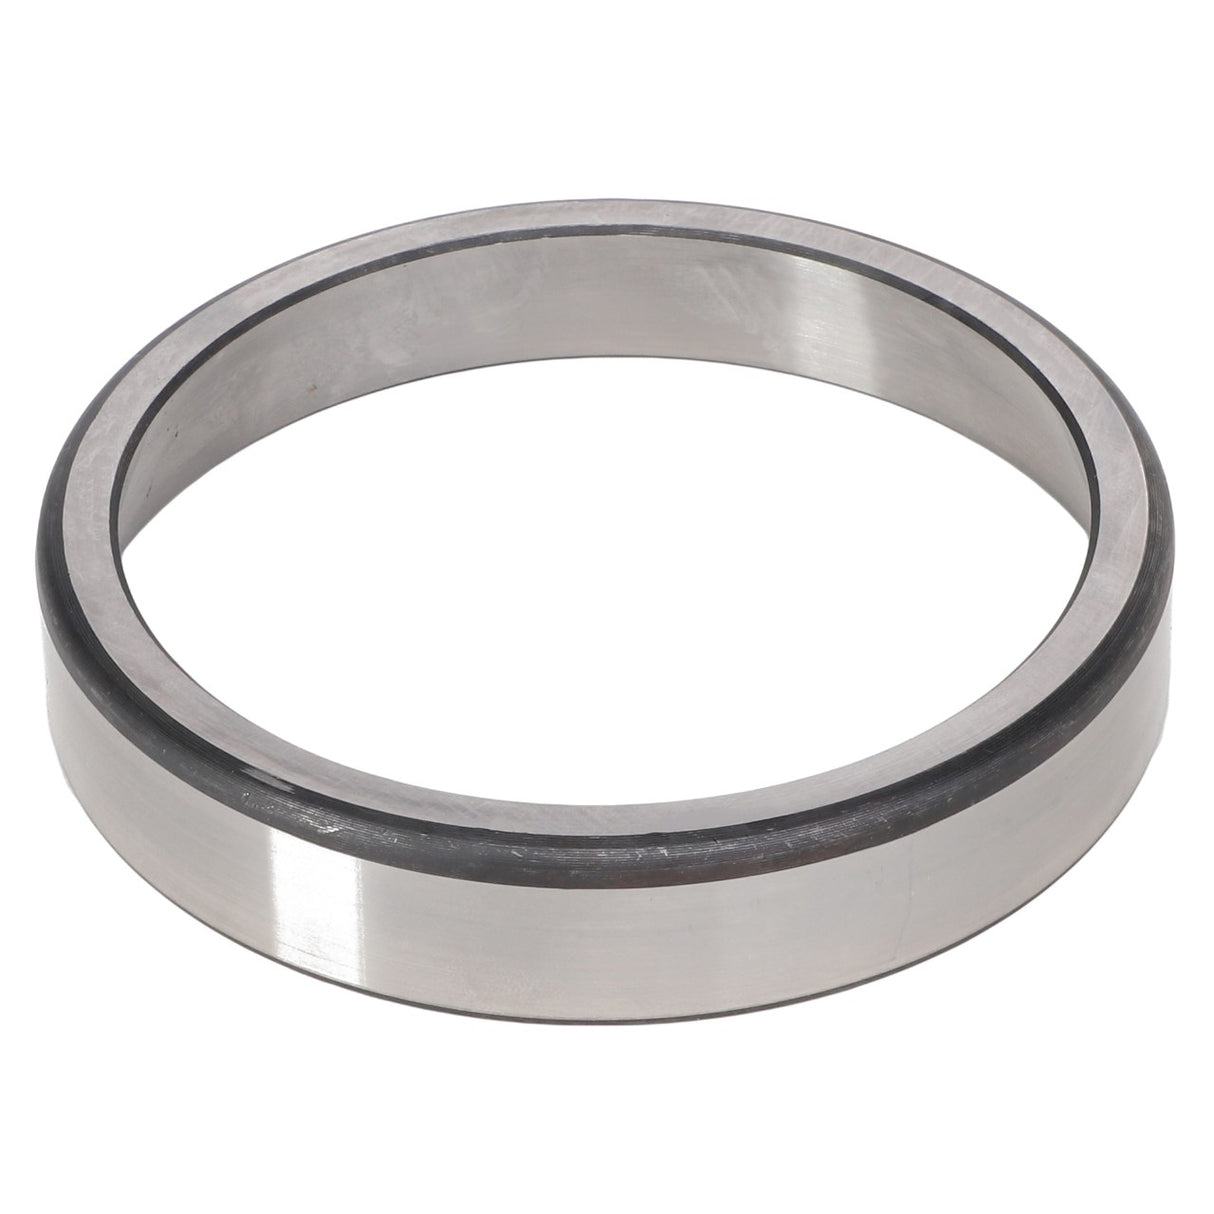 AGCO | BEARING CUP - AG706213